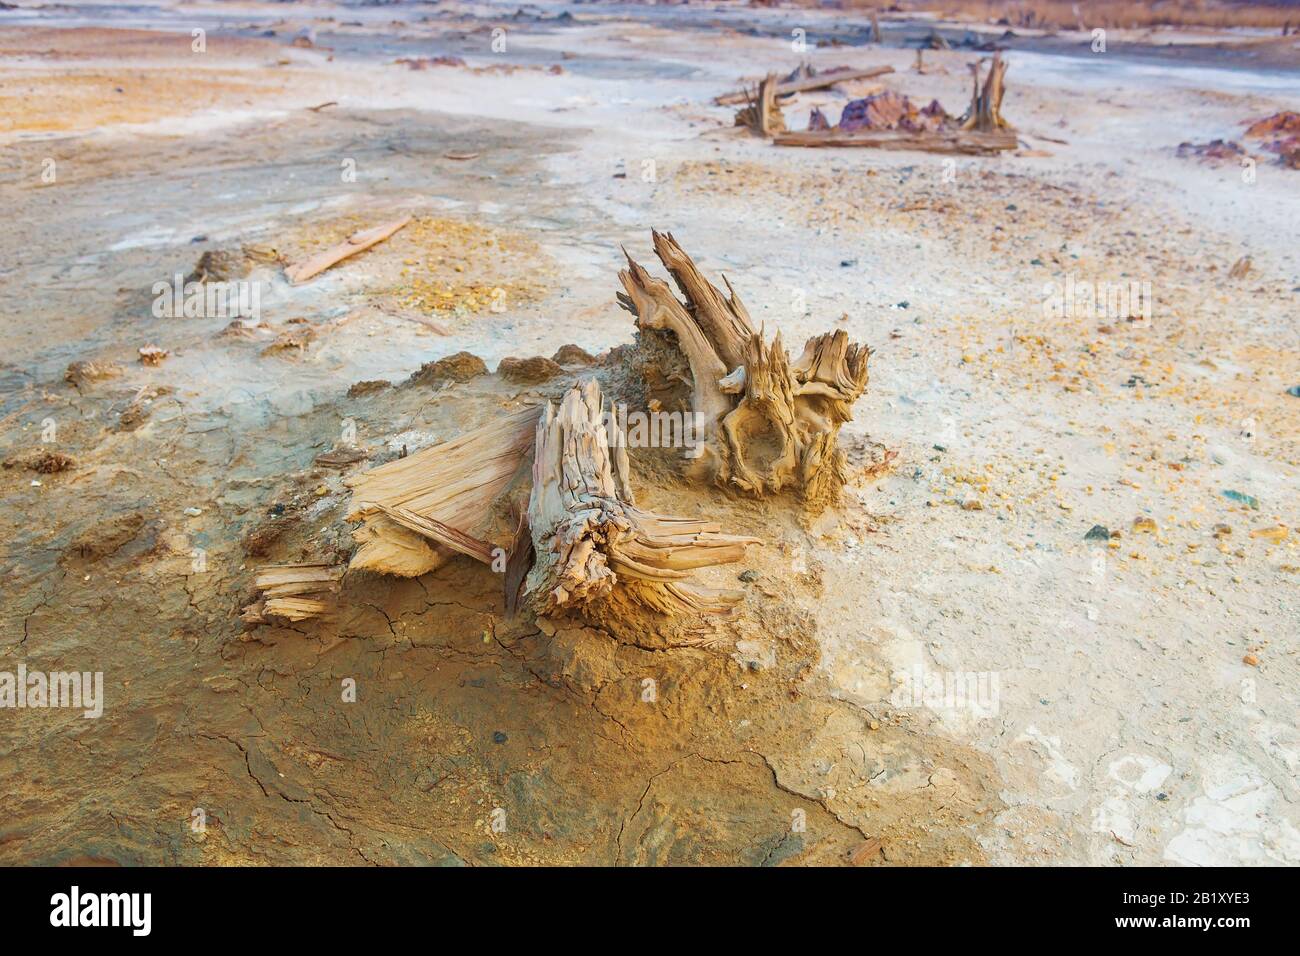 ecological disaster in desert died-out vegetation Stock Photo